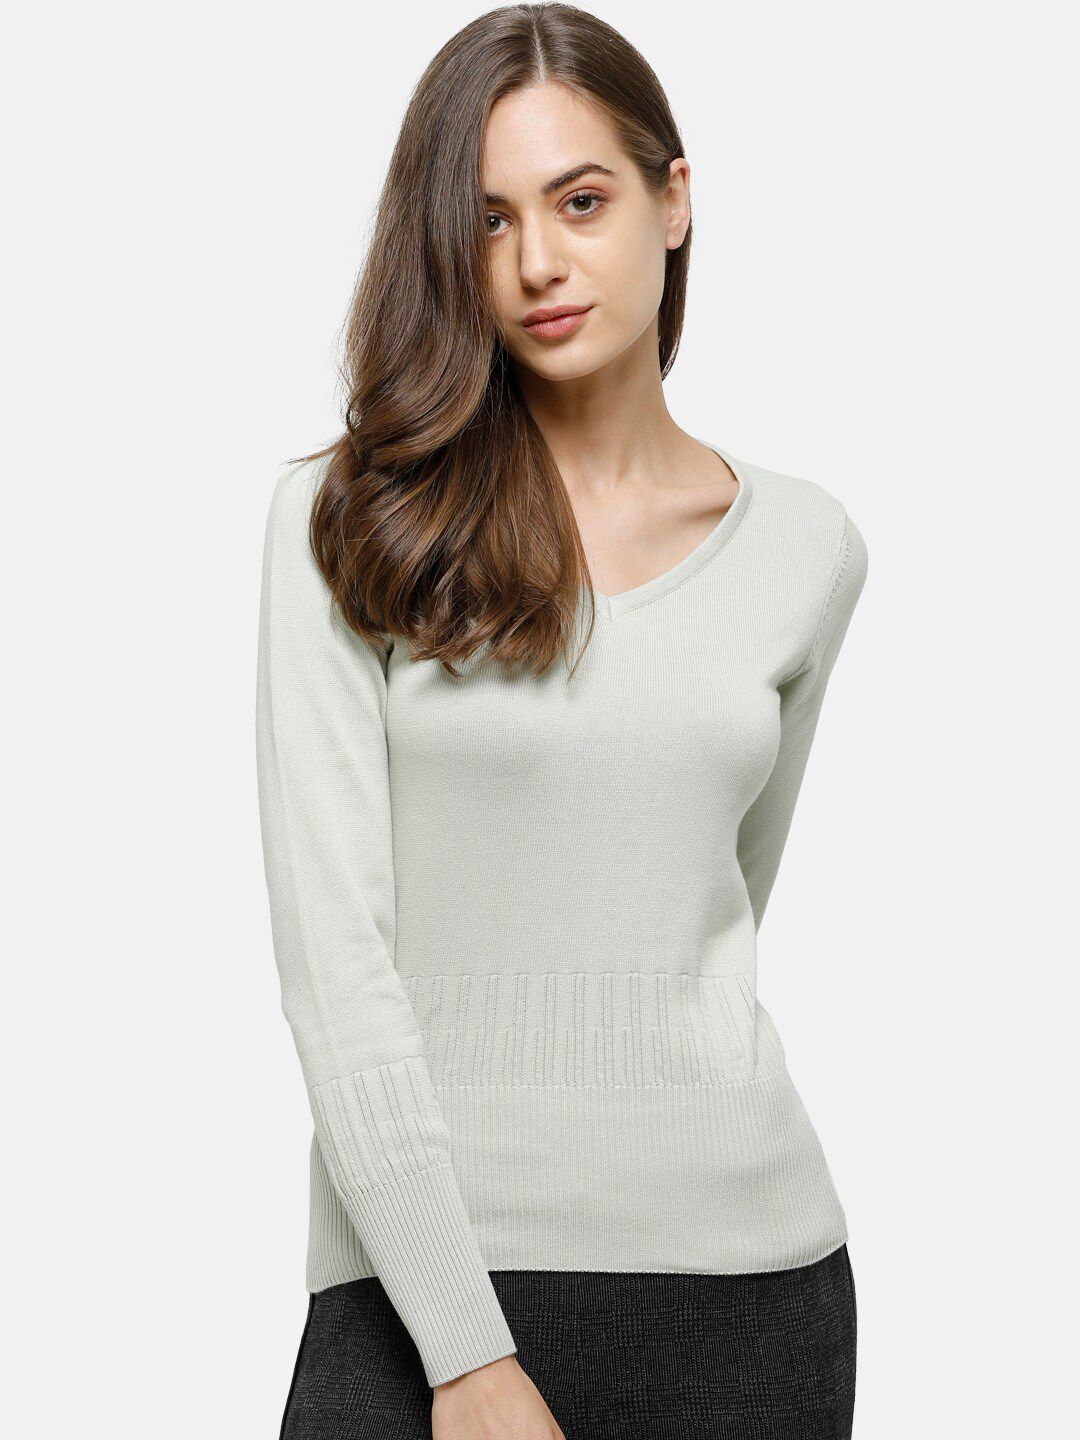 98 Degree North Women Grey Solid V-neck Sweater Price in India